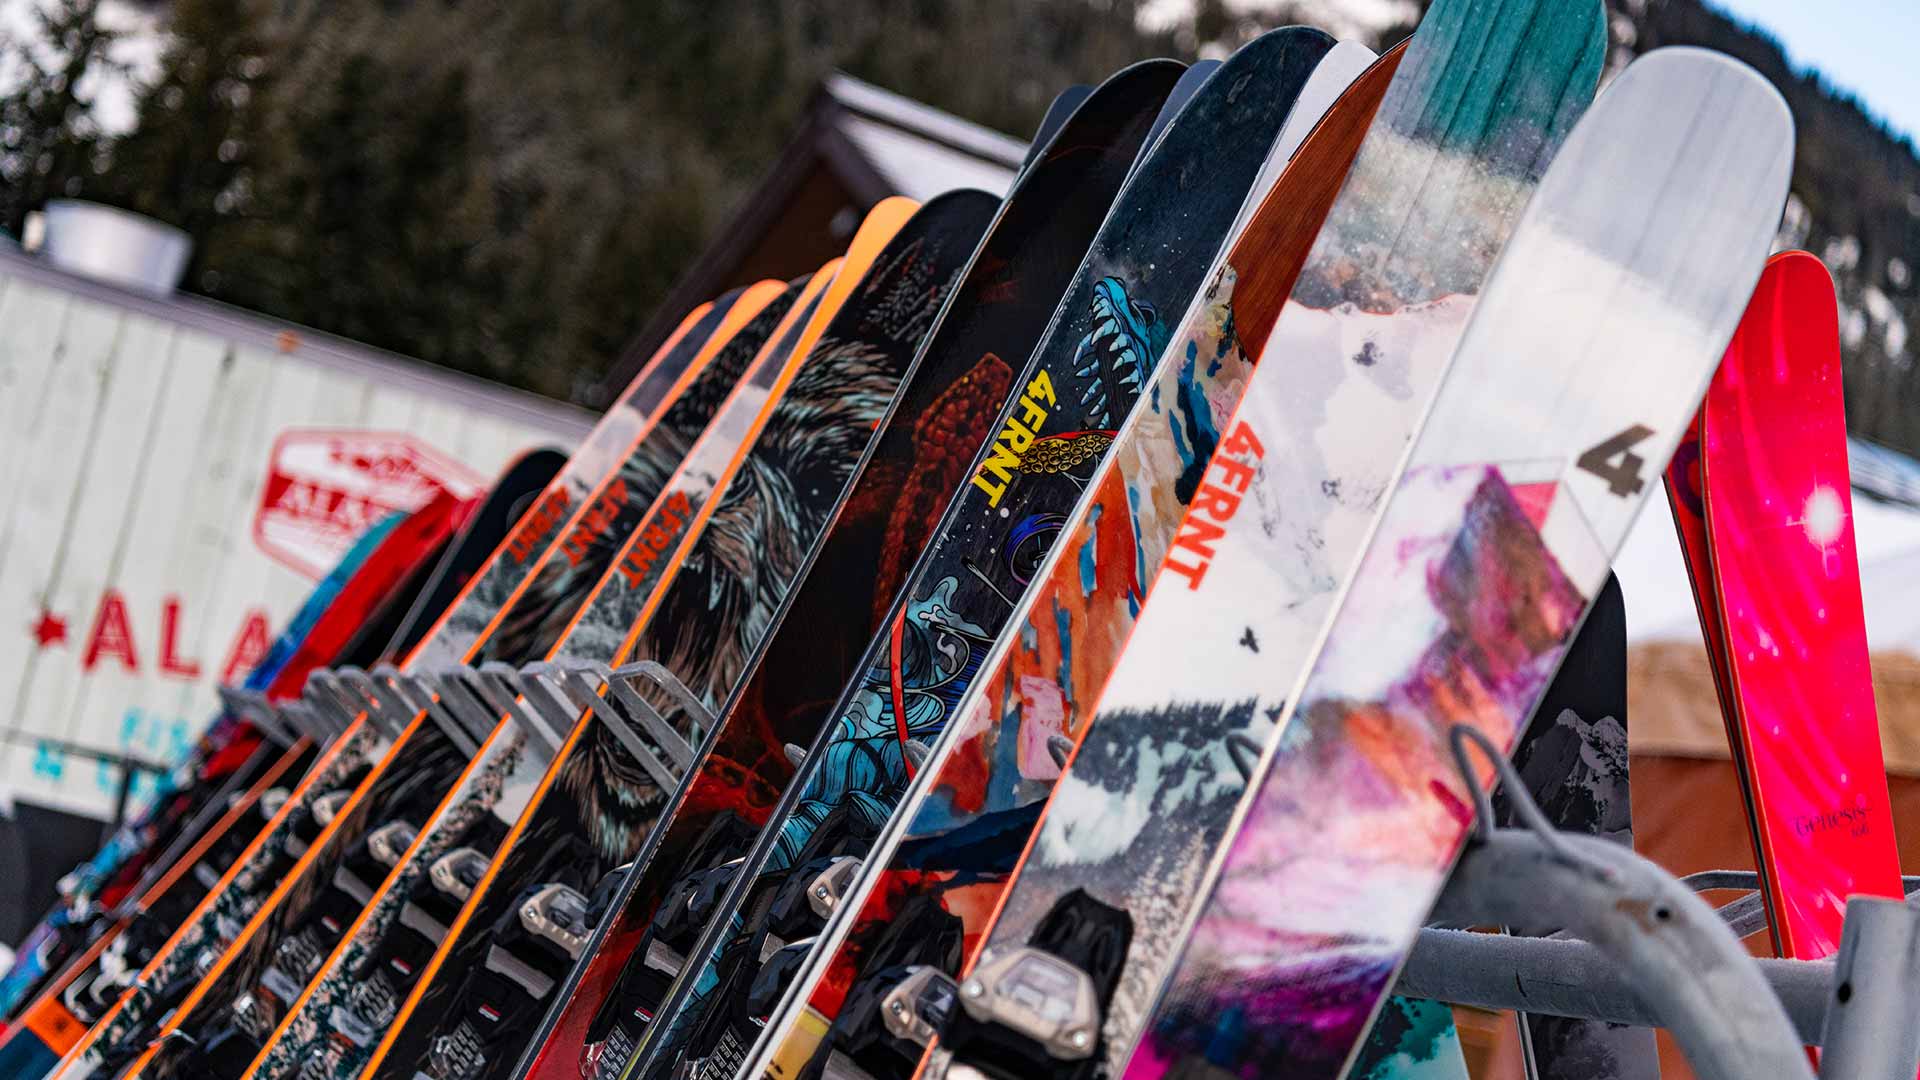 Looking for Unlimited Demos? The Quiver Pass at Crystal Mountain, WA, Might Be Just What You Need